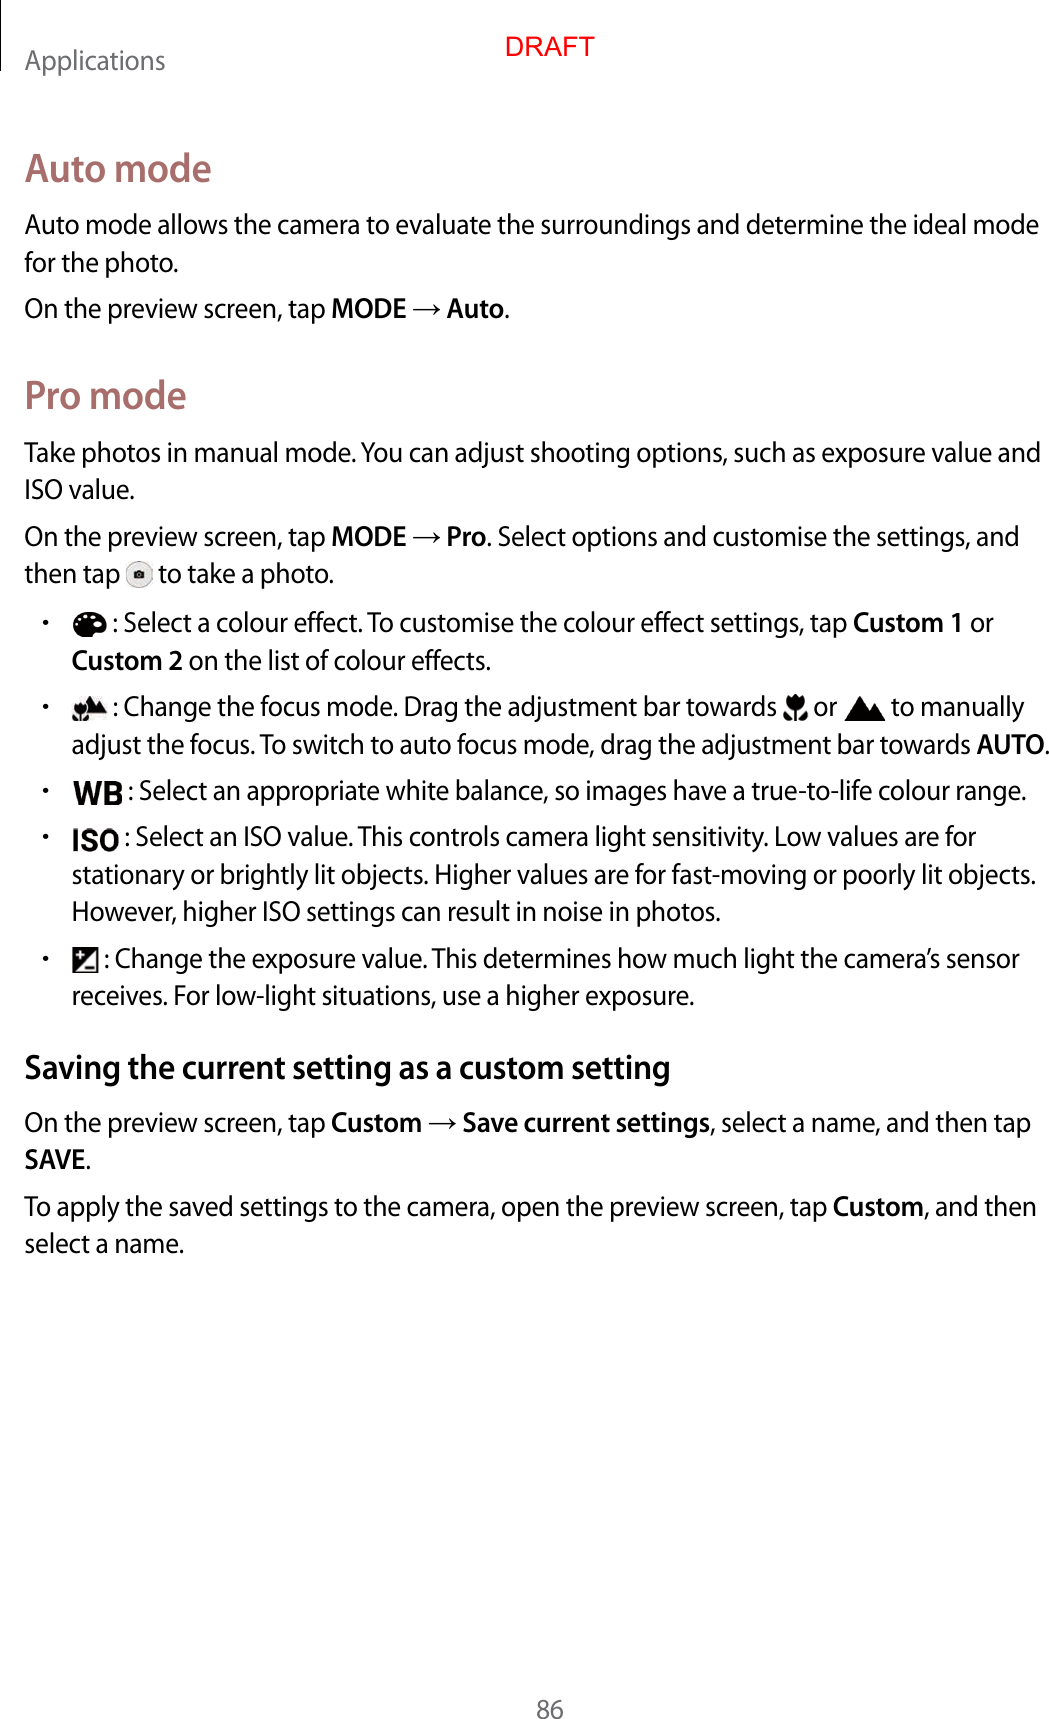 Applications86A uto modeAut o mode allow s the camera t o evalua te the surr oundings and det ermine the ideal mode for the phot o.On the preview scr een, tap MODE  Auto.Pr o modeTake photos in manual mode. You can adjust shooting options, such as exposure v alue and ISO value.On the preview scr een, tap MODE  Pro. Select options and customise the settings , and then tap   to take a photo .•: Select a colour eff ect. To customise the colour effect settings, tap Cust om 1 orCust om 2 on the list of colour eff ects.•: Change the focus mode . Dr ag the adjustment bar t ow ar ds   or  to manually adjust the focus . To switch to auto focus mode , dr ag the adjustment bar t o war ds AUTO.•: Select an appropriat e white balanc e , so images ha v e a true-to-life c olour range .•: Select an ISO value . T his con tr ols camera ligh t sensitivity. Lo w values ar e forstationary or brightly lit objects. Higher values are f or fast-mo ving or poorly lit objects. Howev er, higher ISO settings can result in noise in photos .•: Change the exposure value. This determines how much light the camera’s sensorreceives . For low -light situations, use a higher exposure.Saving the curren t setting as a custom settingOn the preview scr een, tap Custom  Save curr en t settings, select a name, and then tap SAVE.To apply the sav ed settings to the camer a, open the pr eview scr een, tap Custom, and then select a name.DRAFT